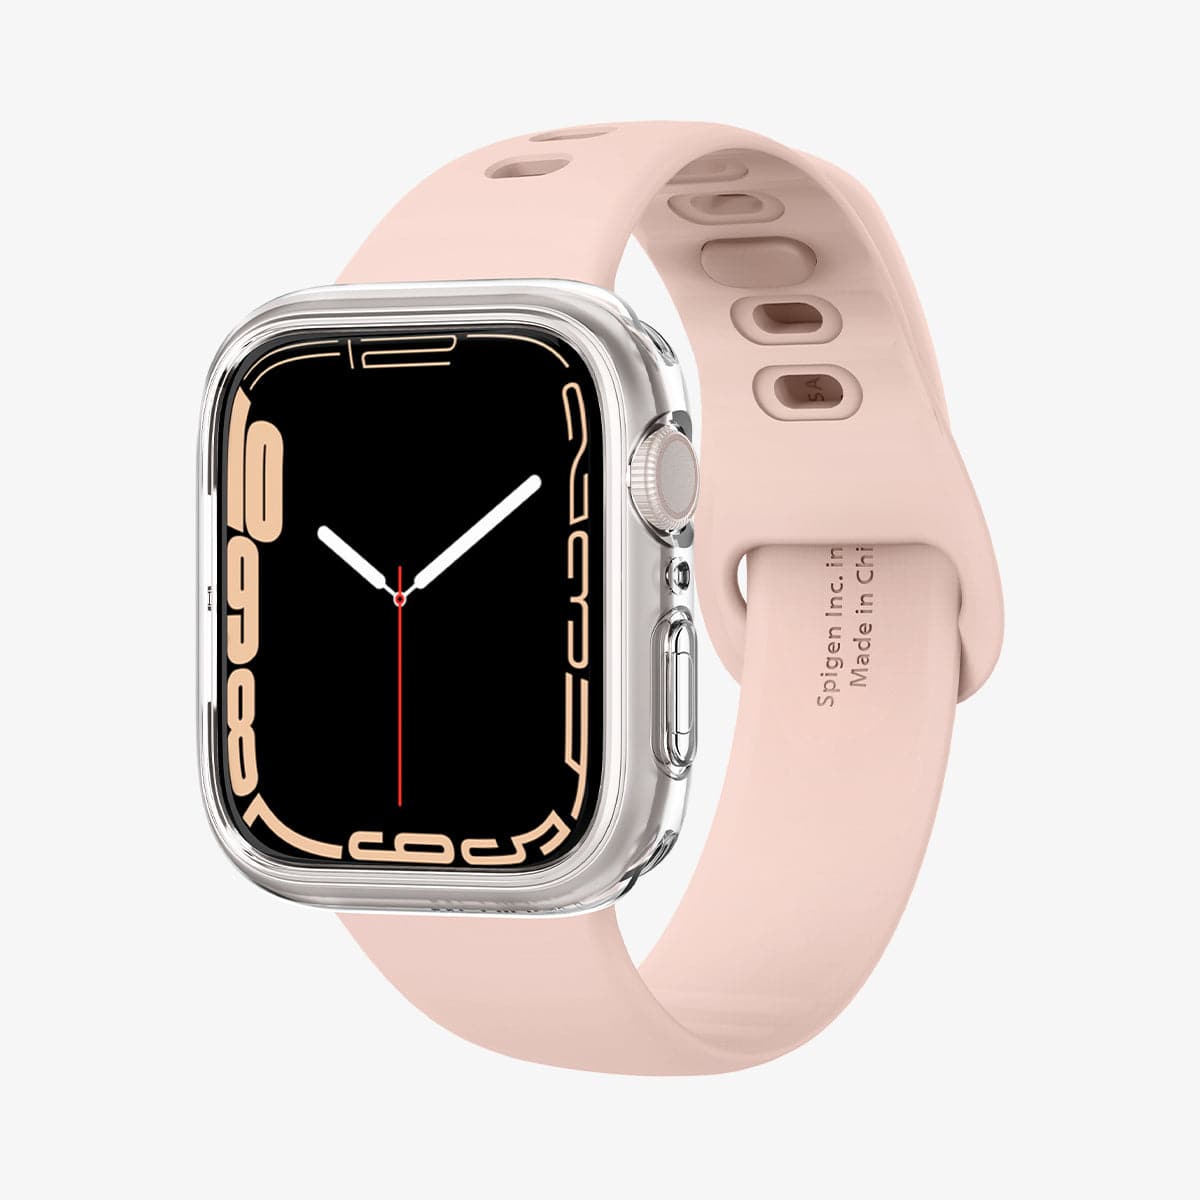 ACS04195 - Apple Watch Series (Apple Watch (41mm)) Case Liquid Crystal in crystal clear showing the front and partial inside of band